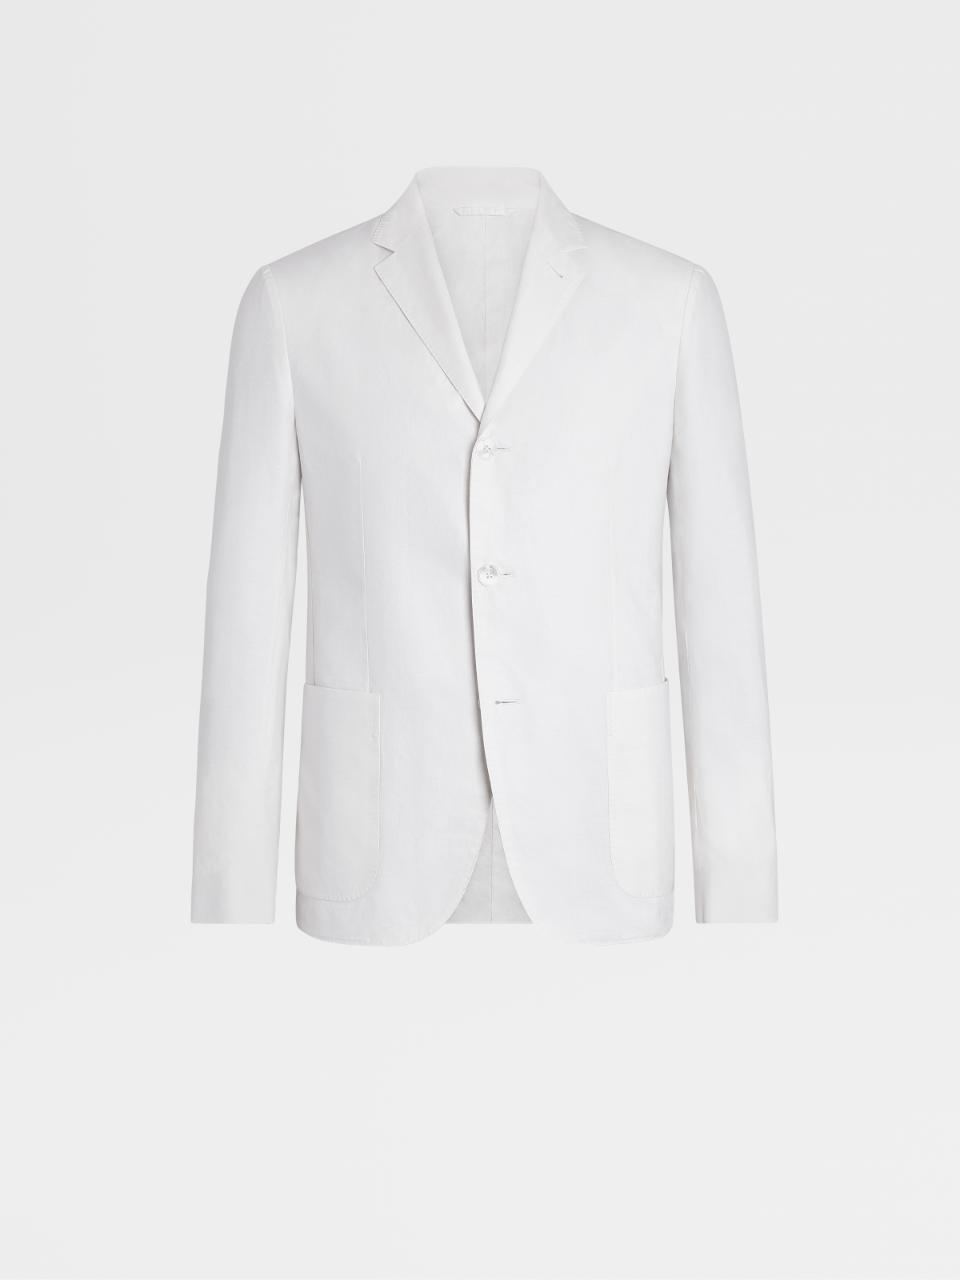 White Cotton Linen and Silk Garment Washed Shirt Jacket, Slim Fit